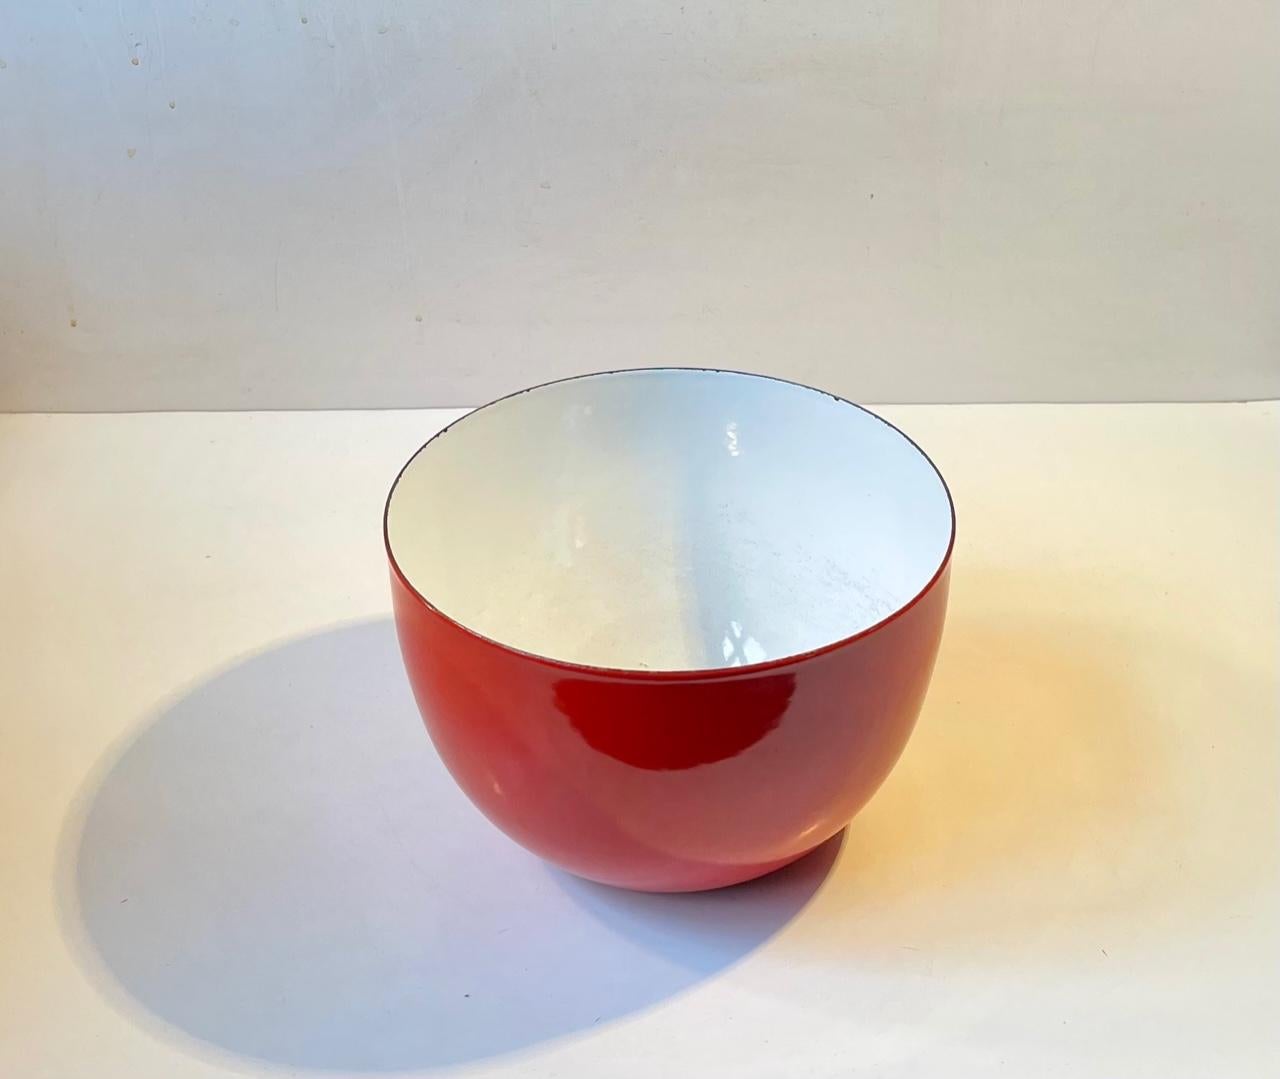 Fruit, salad or centerpiece bowl in enameled steel. Red exterior and white interior. Beautiful strict esthetic lines and a 'light' appearance. Designed by Kaj Franck and manufactured by Arabia-Finel in Finland during the early 1960s. Measurements: